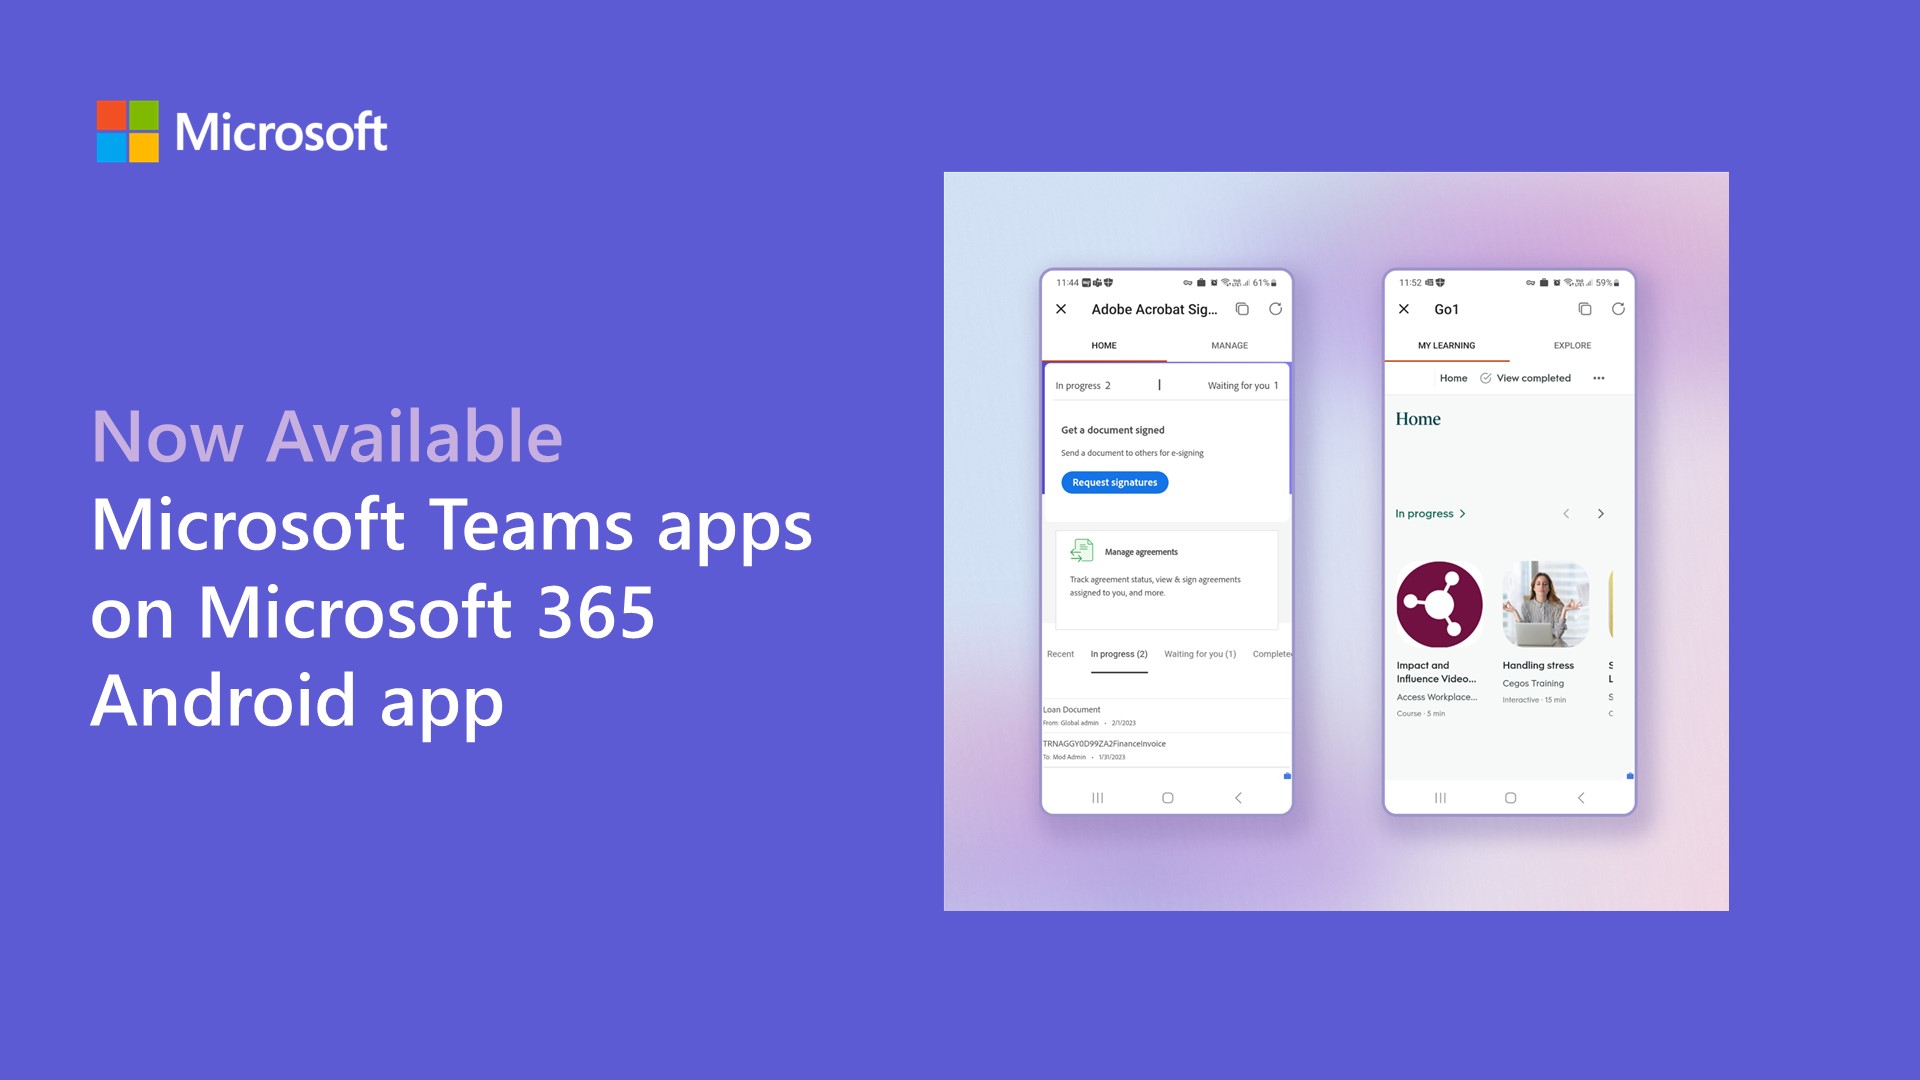 Microsoft Teams apps are now generally available on Microsoft 365 Android app